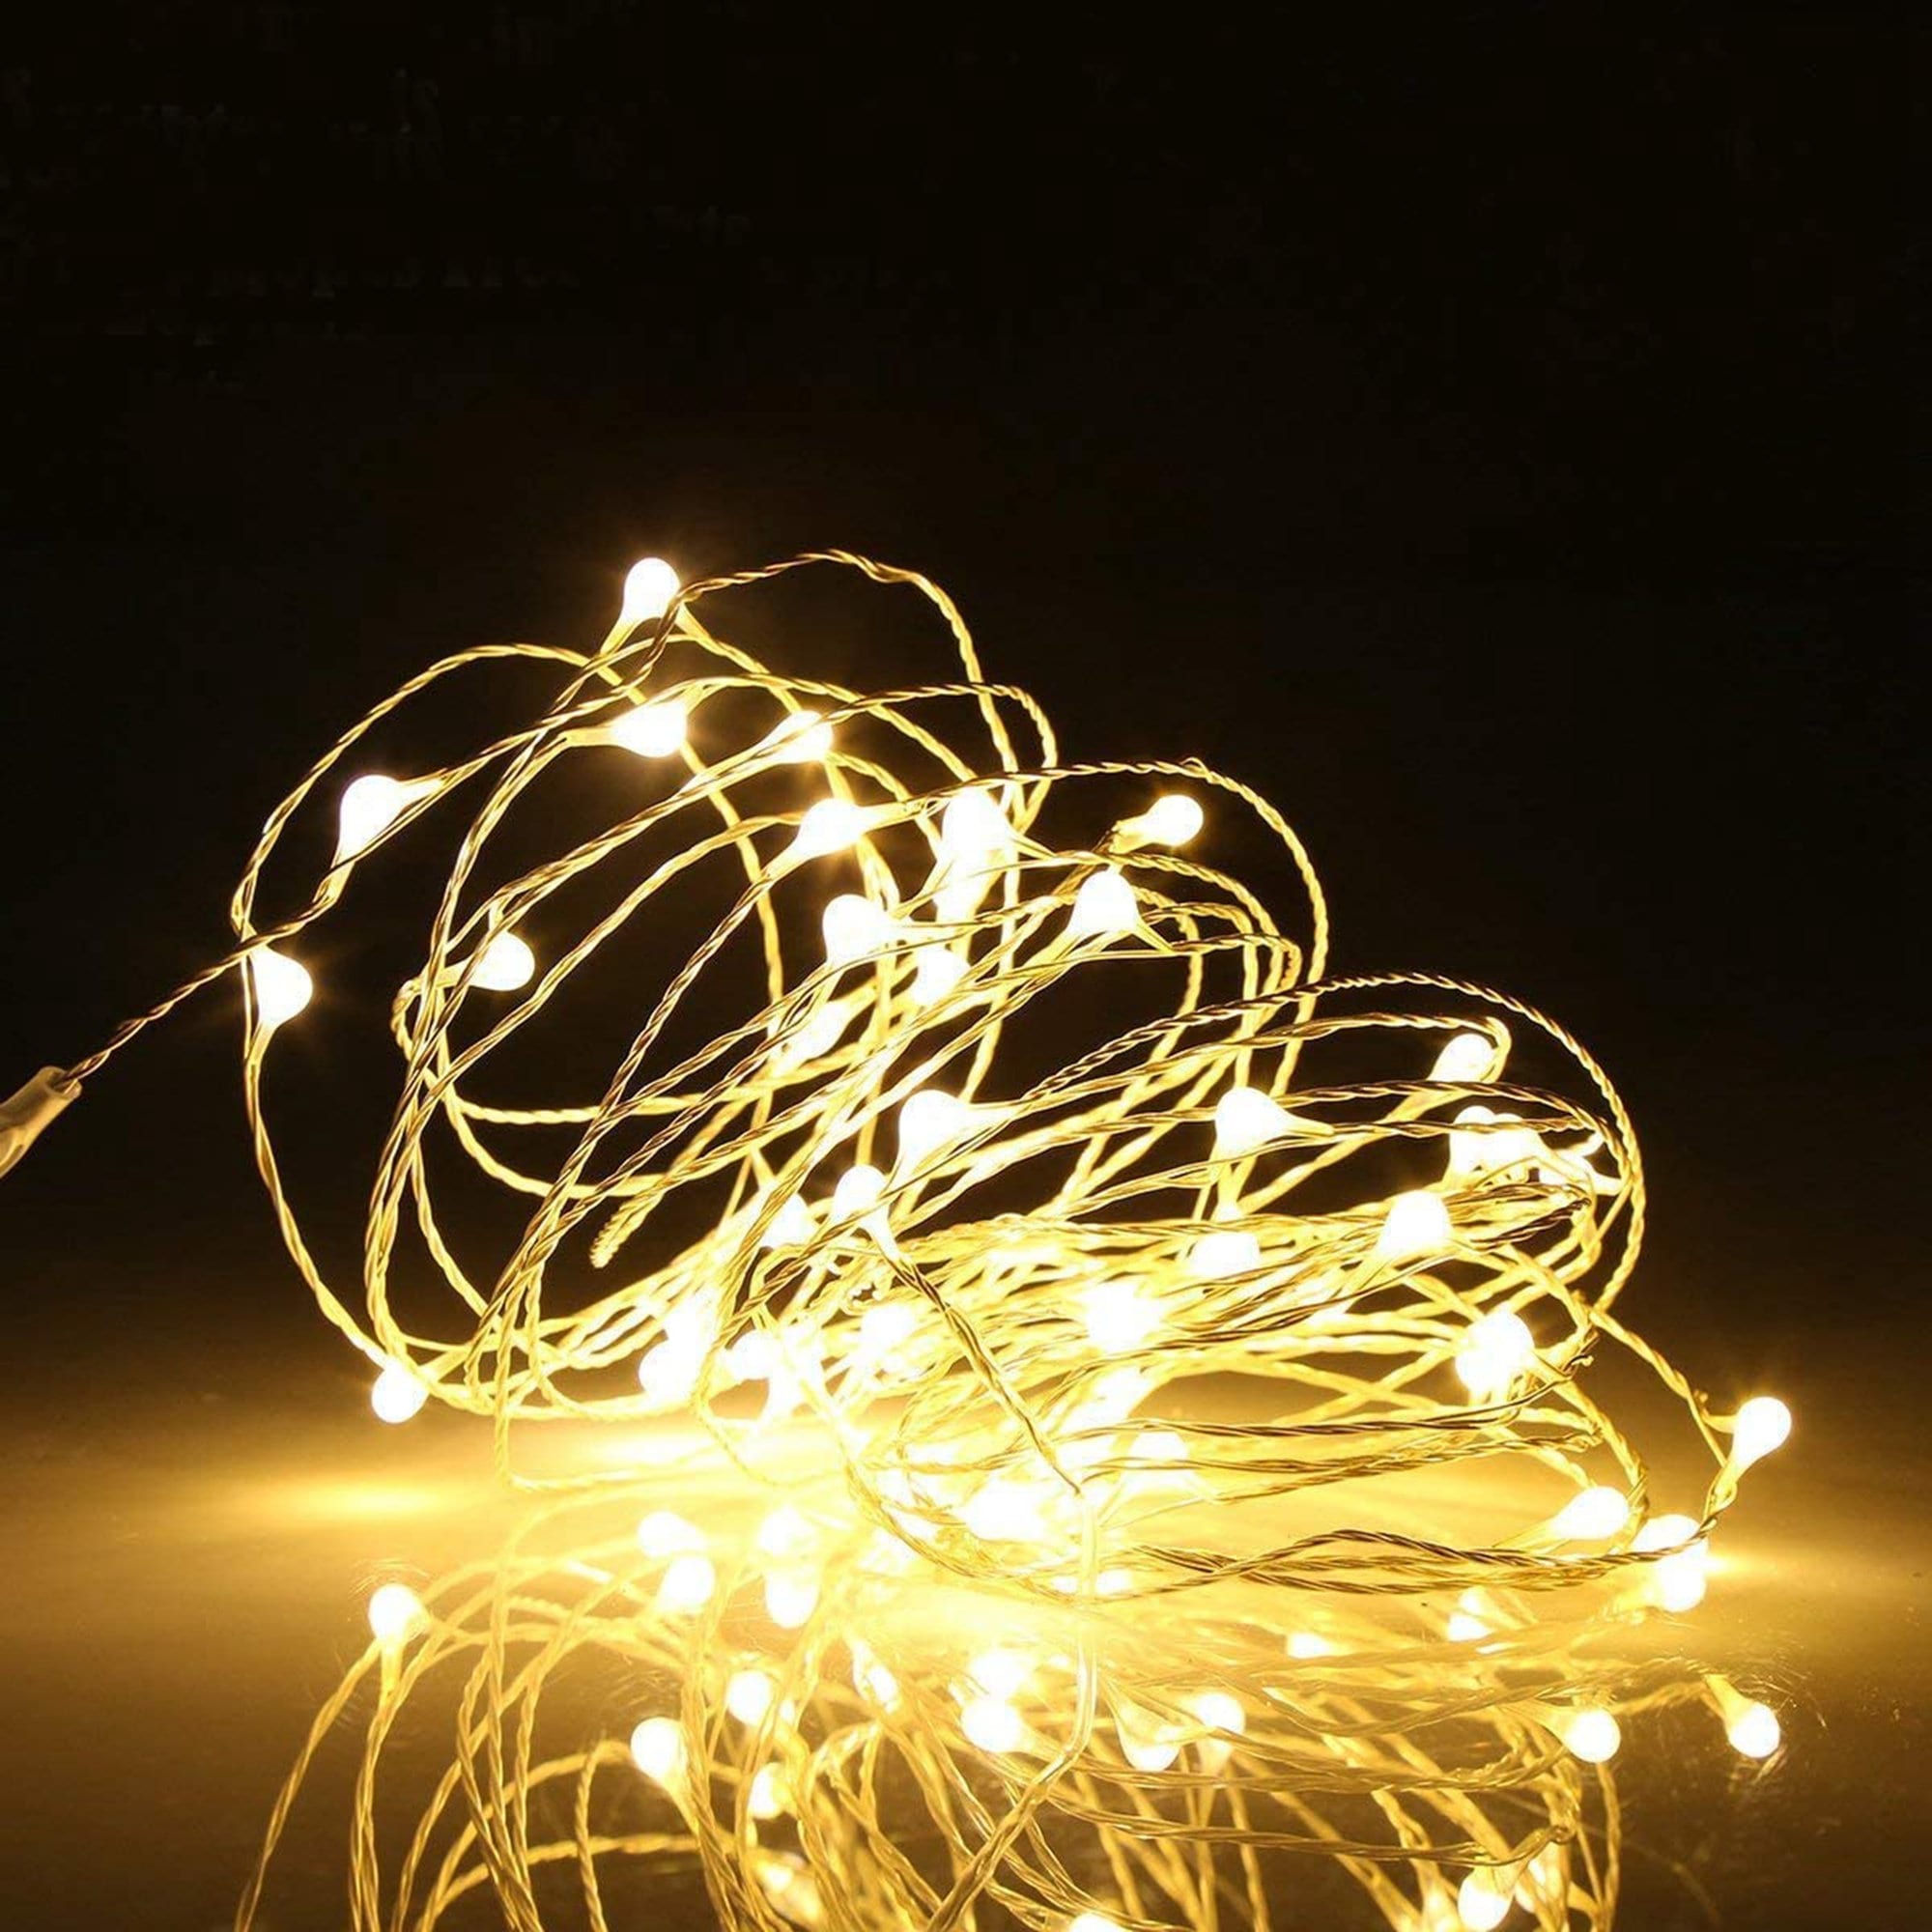 5M/10M/20M USB POWERED LED String Light Fairy Warm White Garden/ Home/Christmas/Wedding Party Home Decoration Mood Lighting Ambient Lights